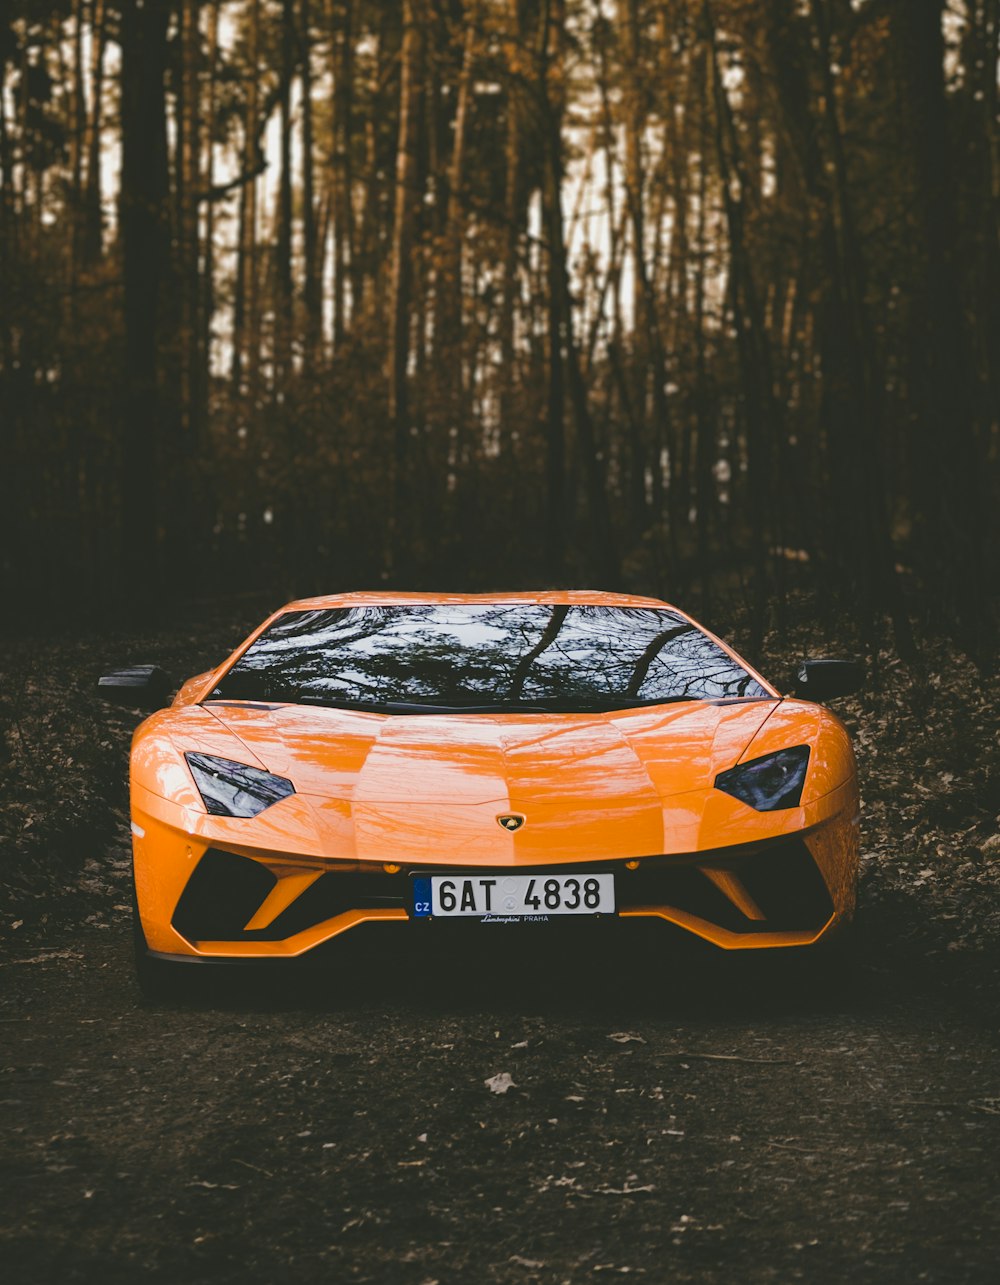 100+ Cars Pictures | Download Free Images on Unsplash